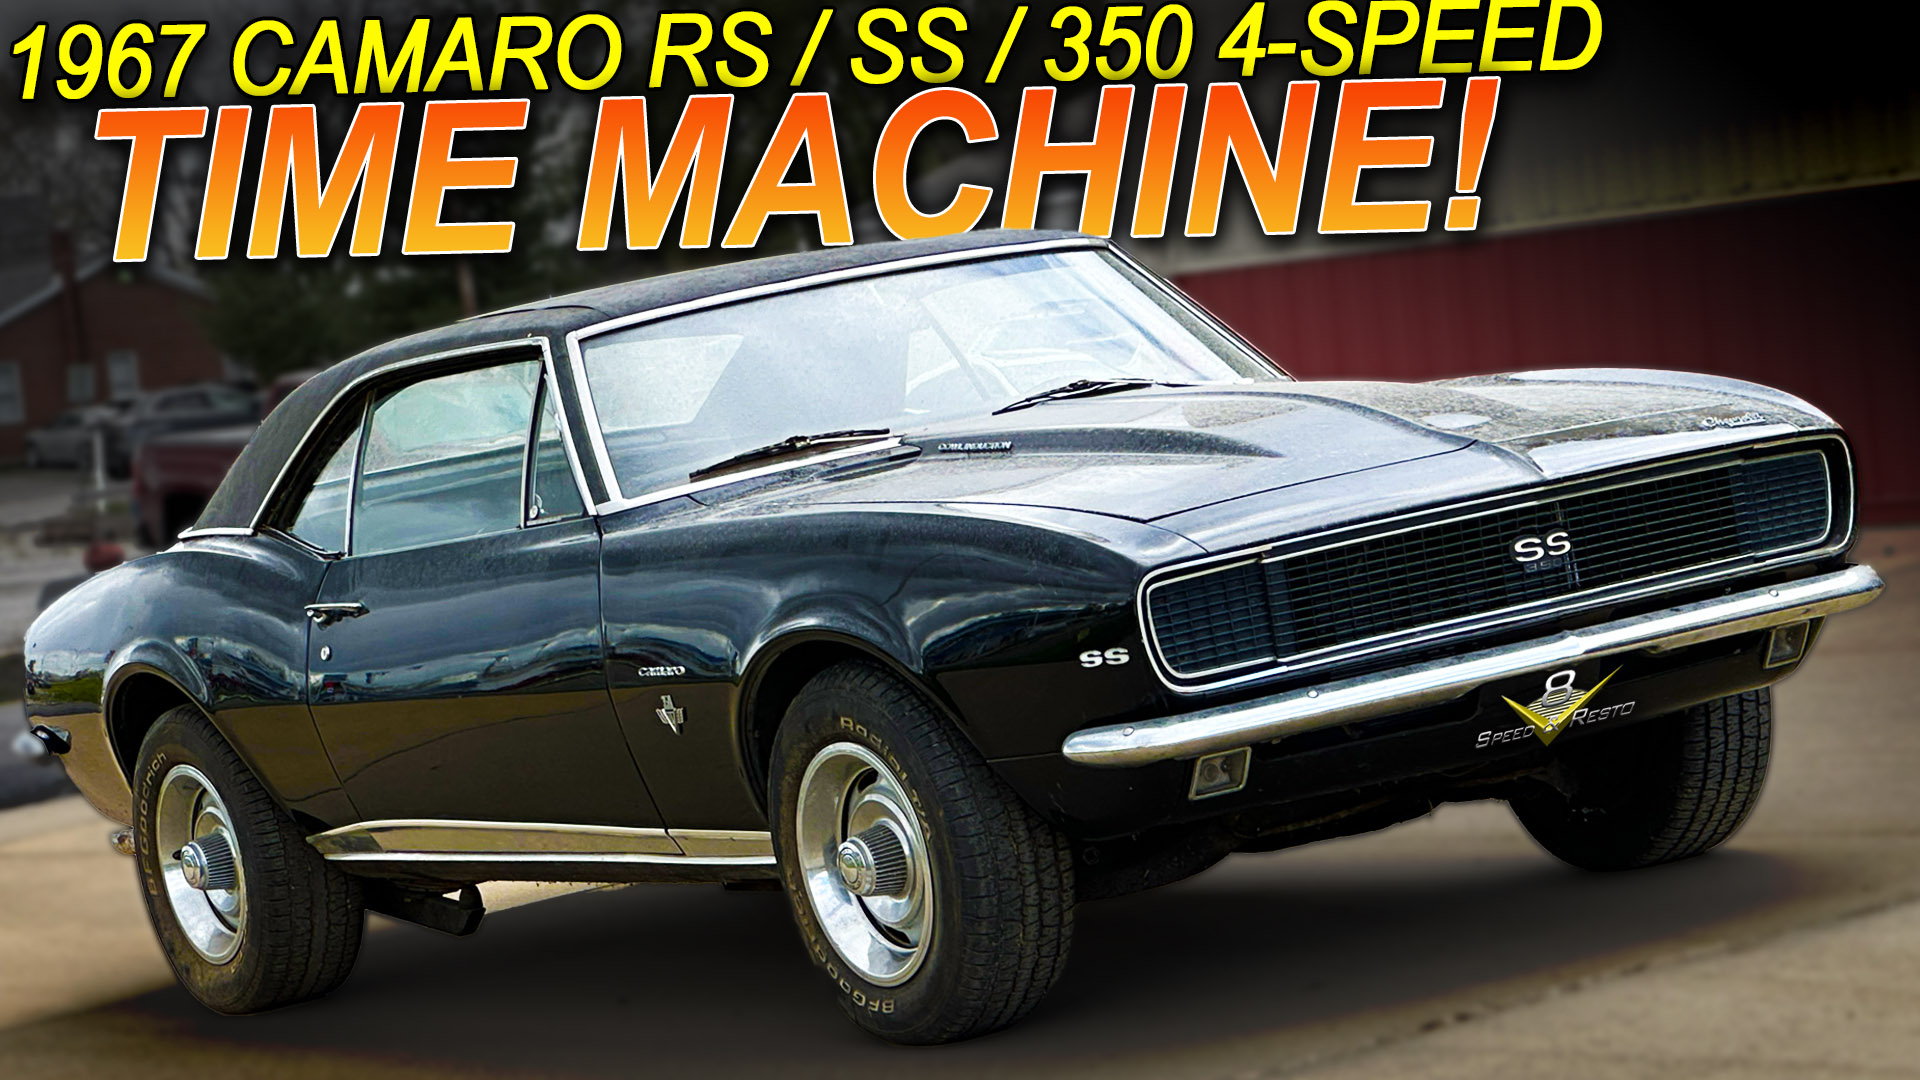 1967 Chevrolet Camaro RS ss 350 4 Speed at V8 Speed and Resto Shop